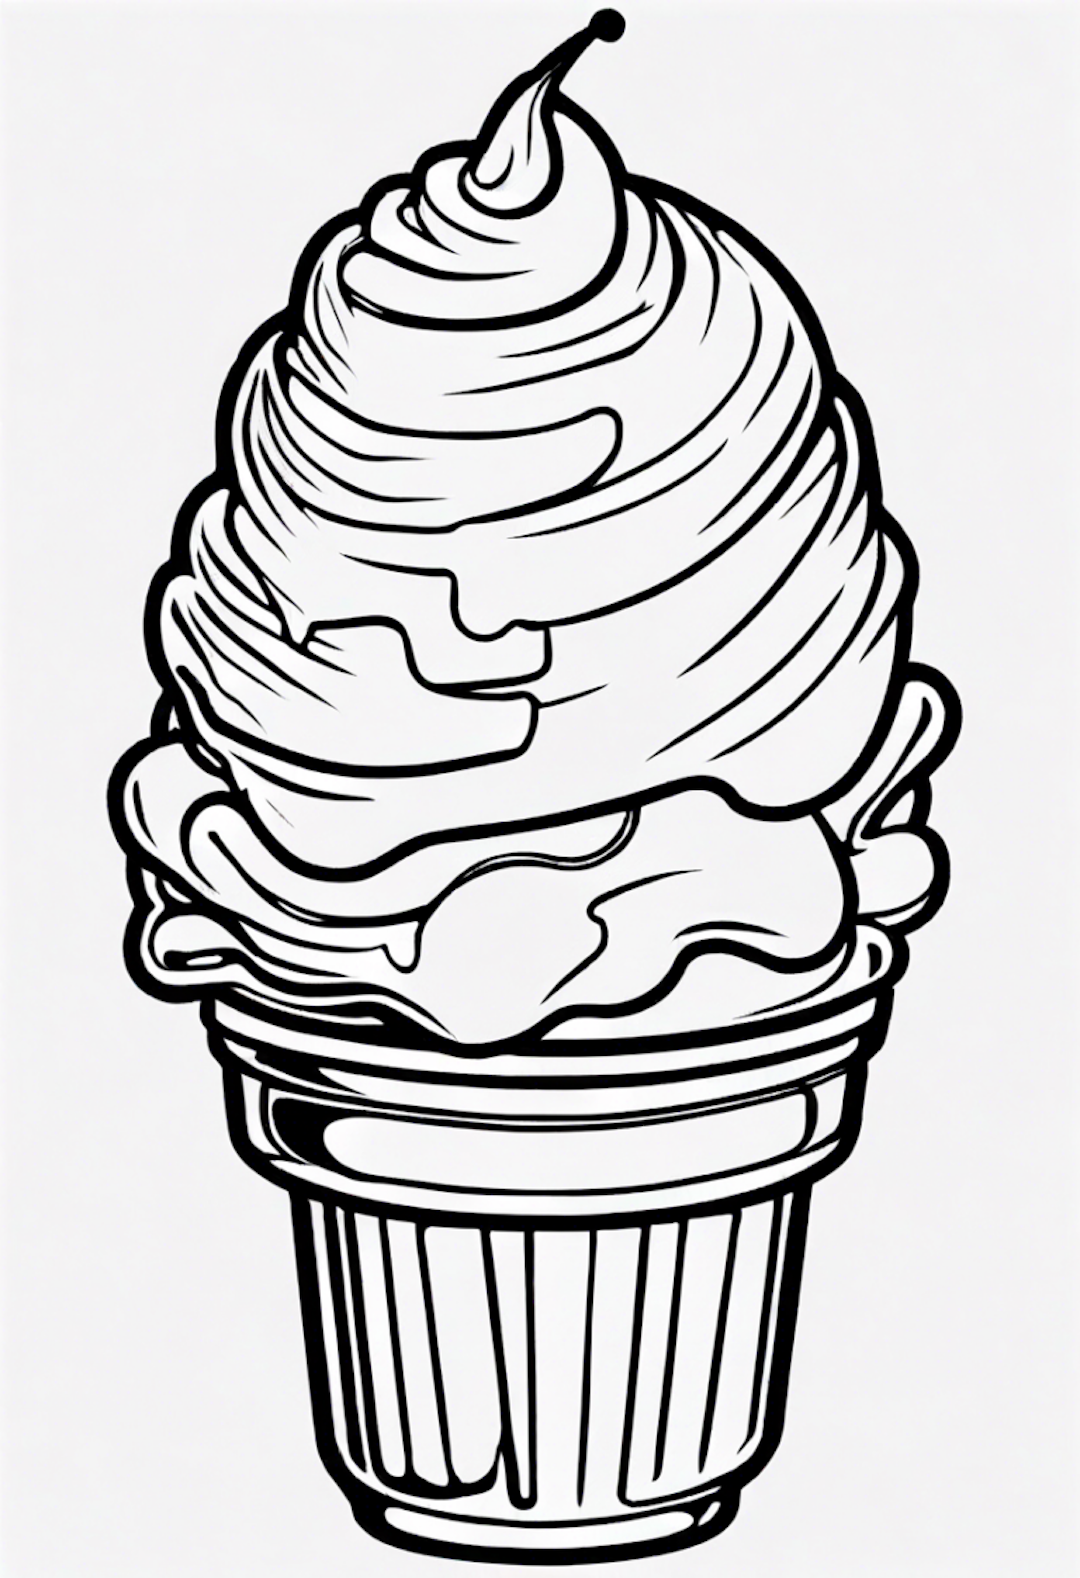 Sweet Ice Cream Delight Coloring Page coloring pages